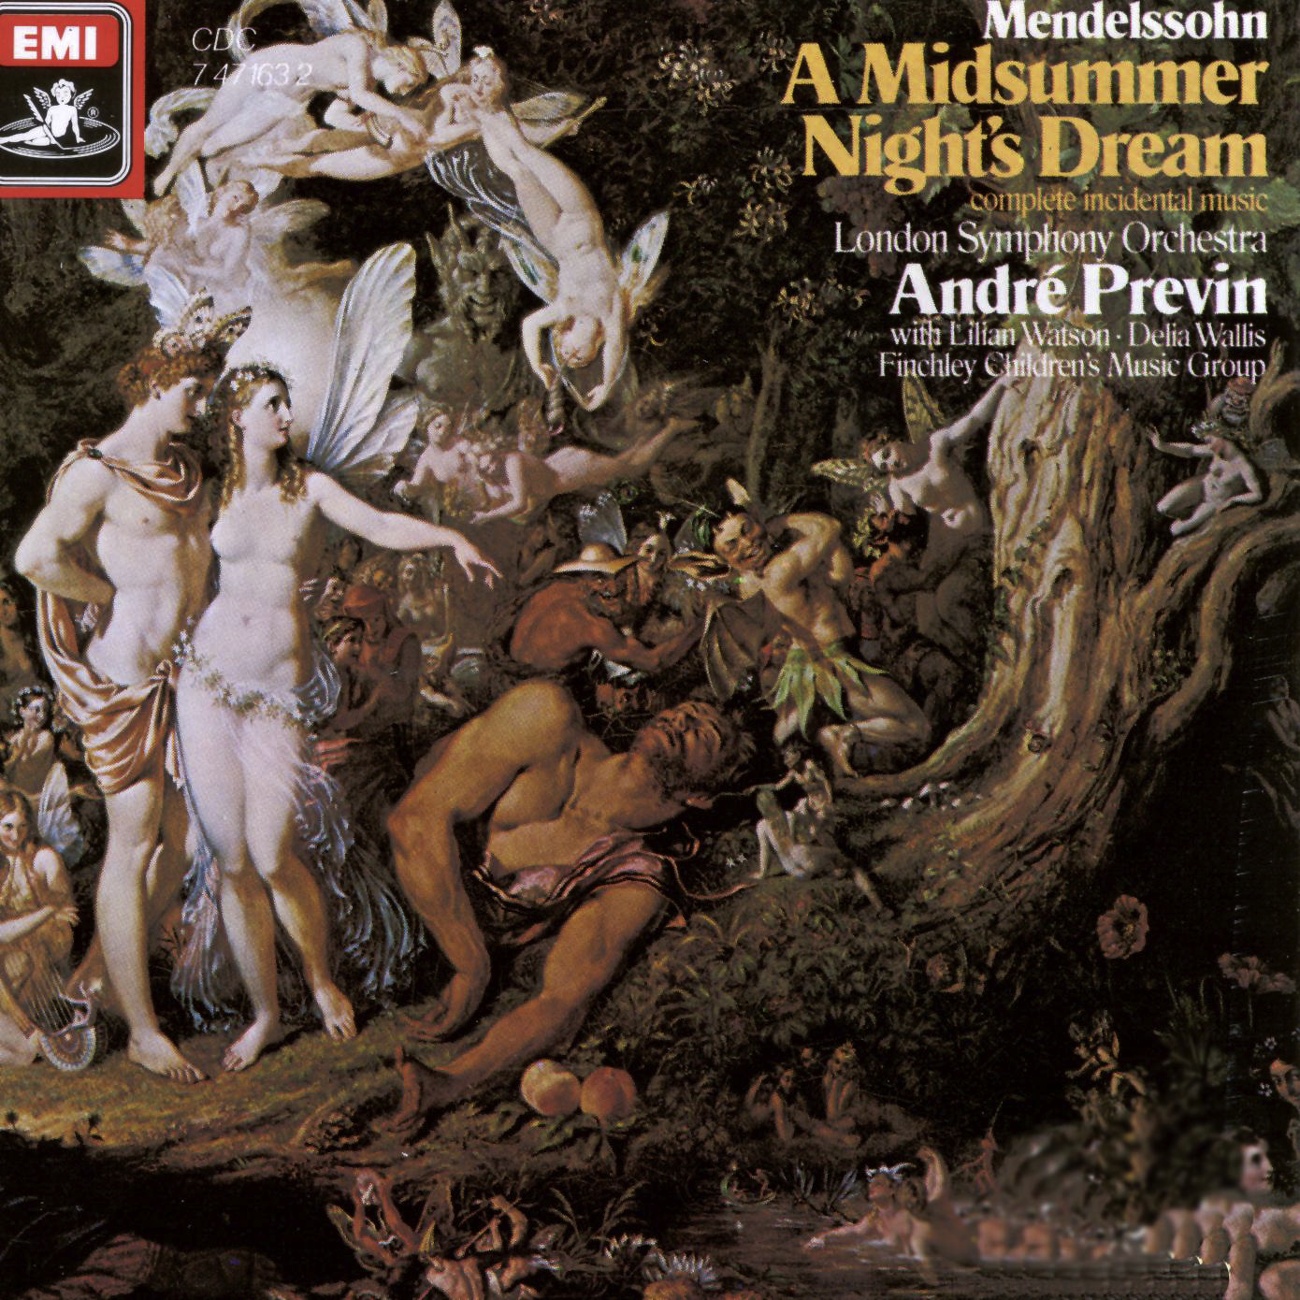 A Midsummer Night's Dream - incidental music Opp. 21 and 61 (1985 Digital Remaster): Nocturne (Act 3)